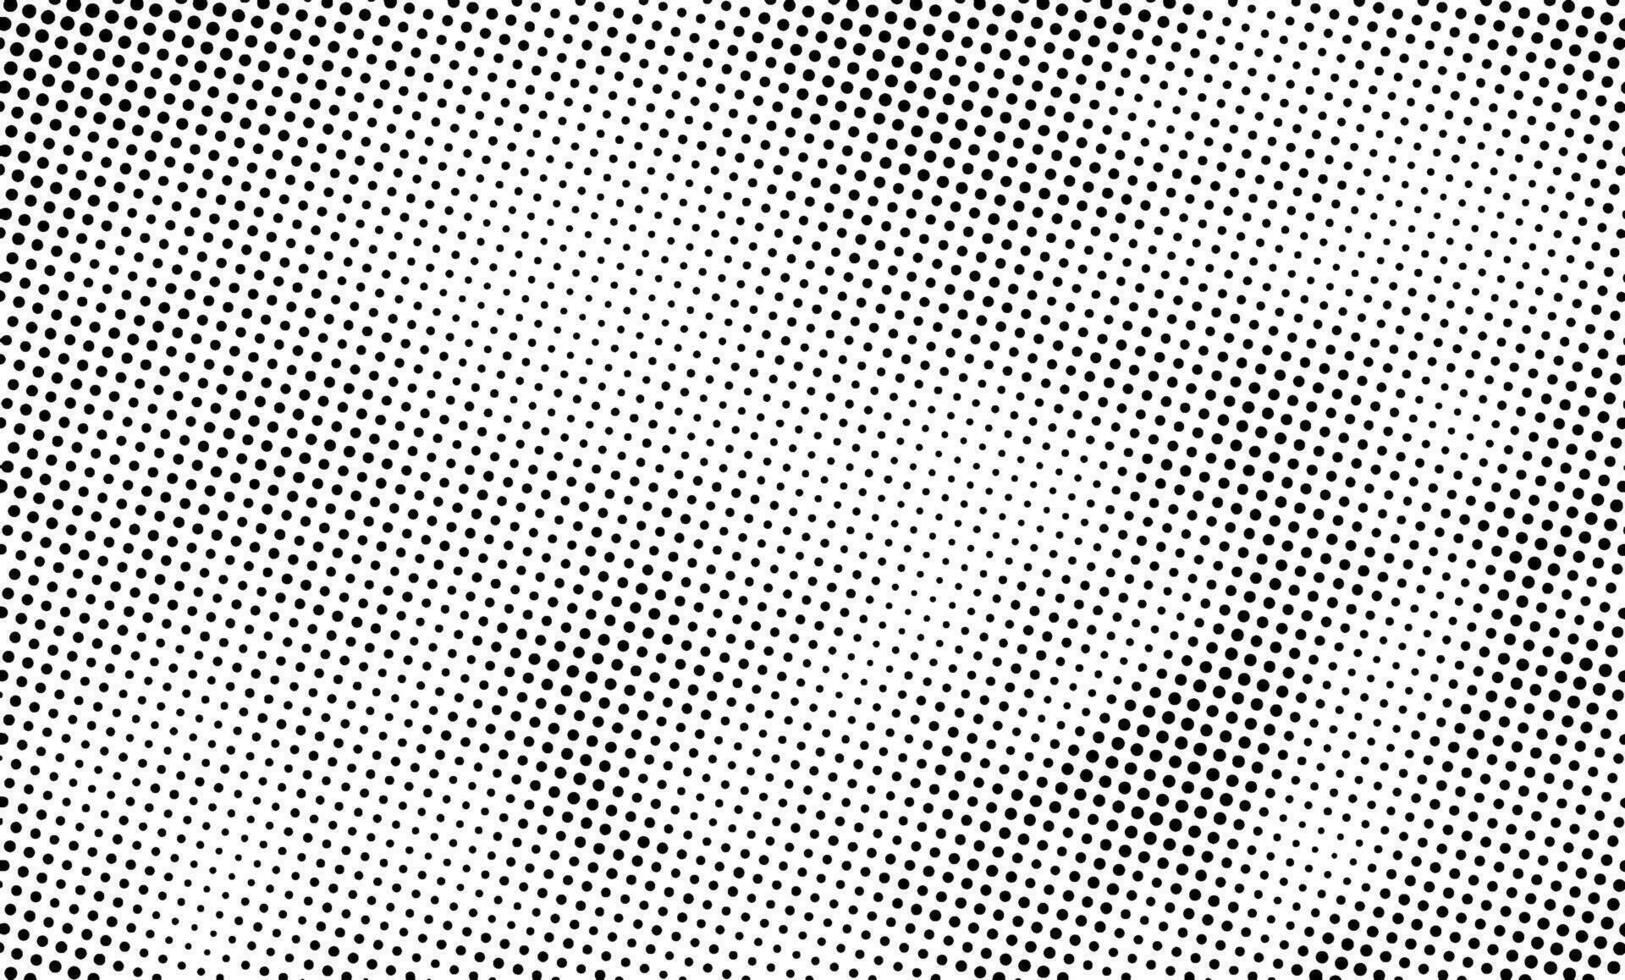 a black and white halftone metal grid pattern with a white background, Black color halftone background halftone circle dotted dot cmyk background dot pattern fading dots vector